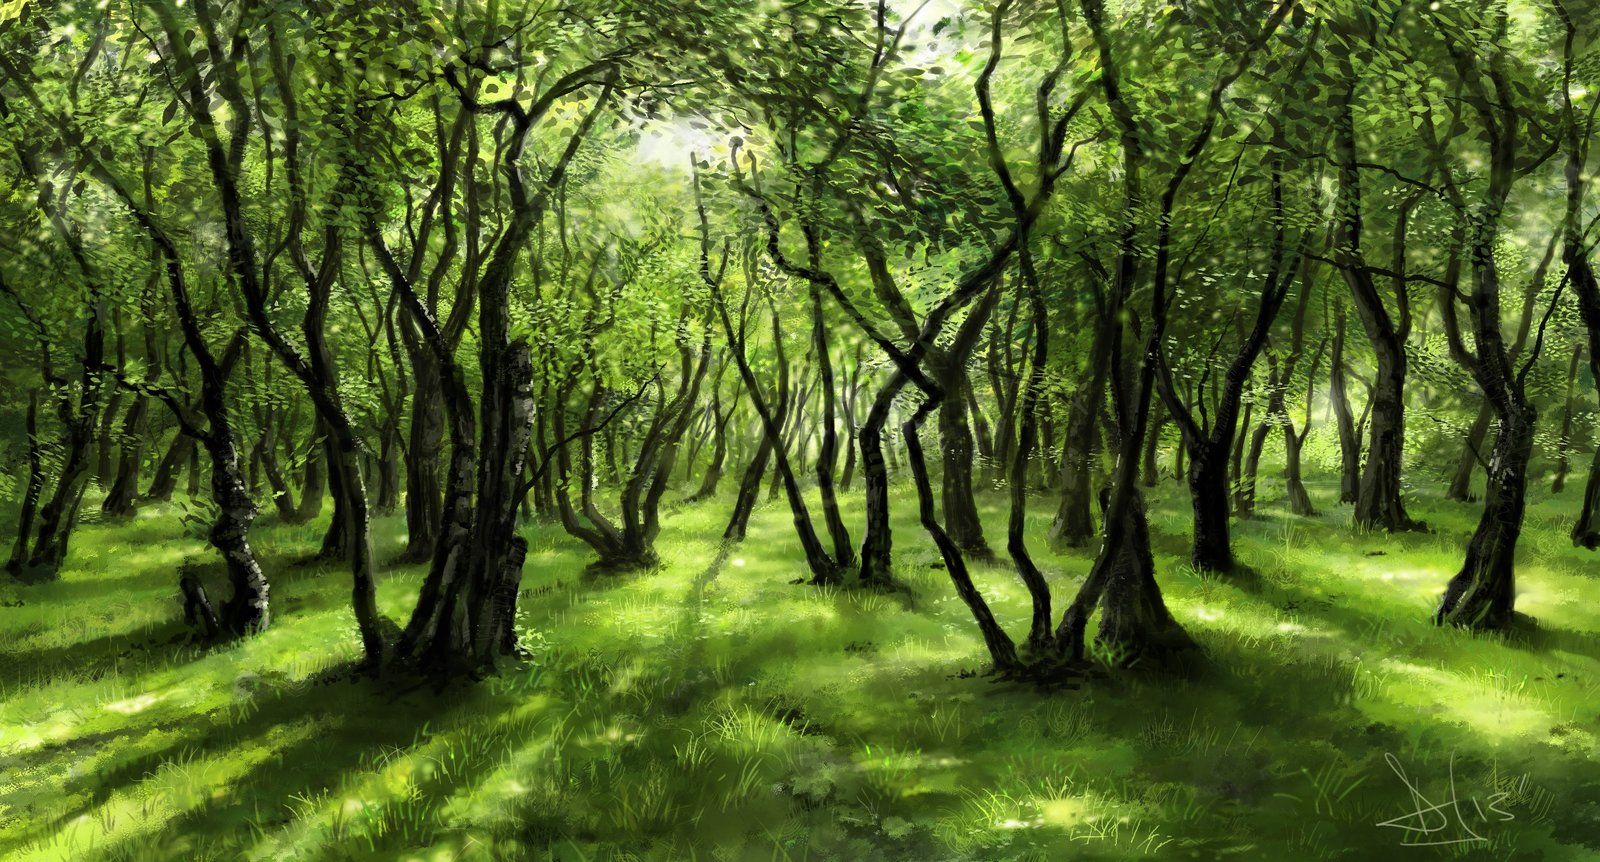 Green forest study (2)